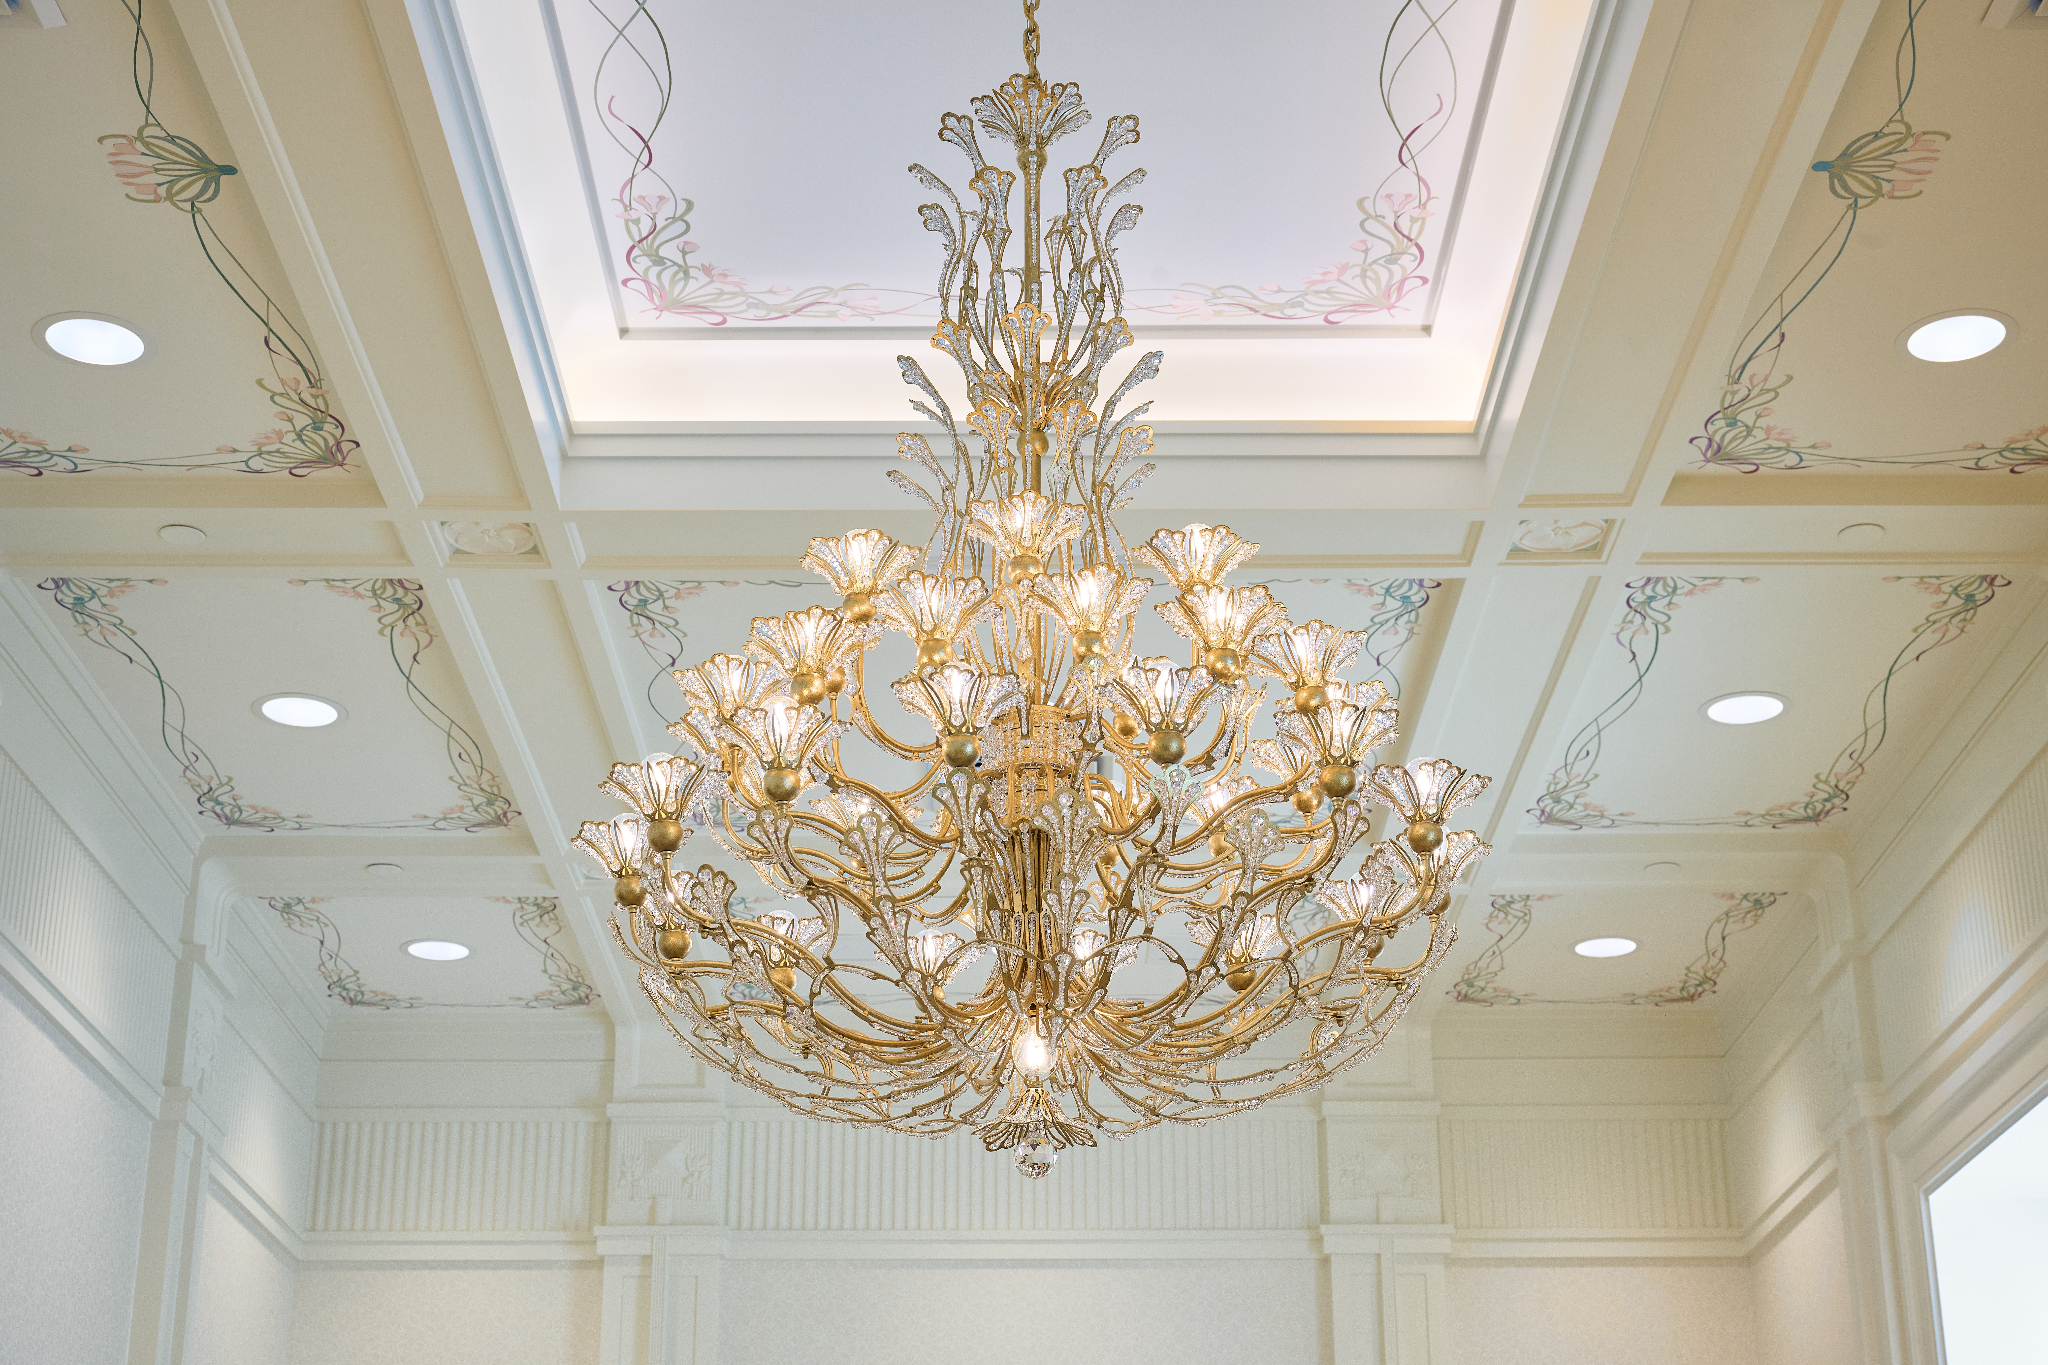 A chandelier with a flower-shaped design around each lightbulb.